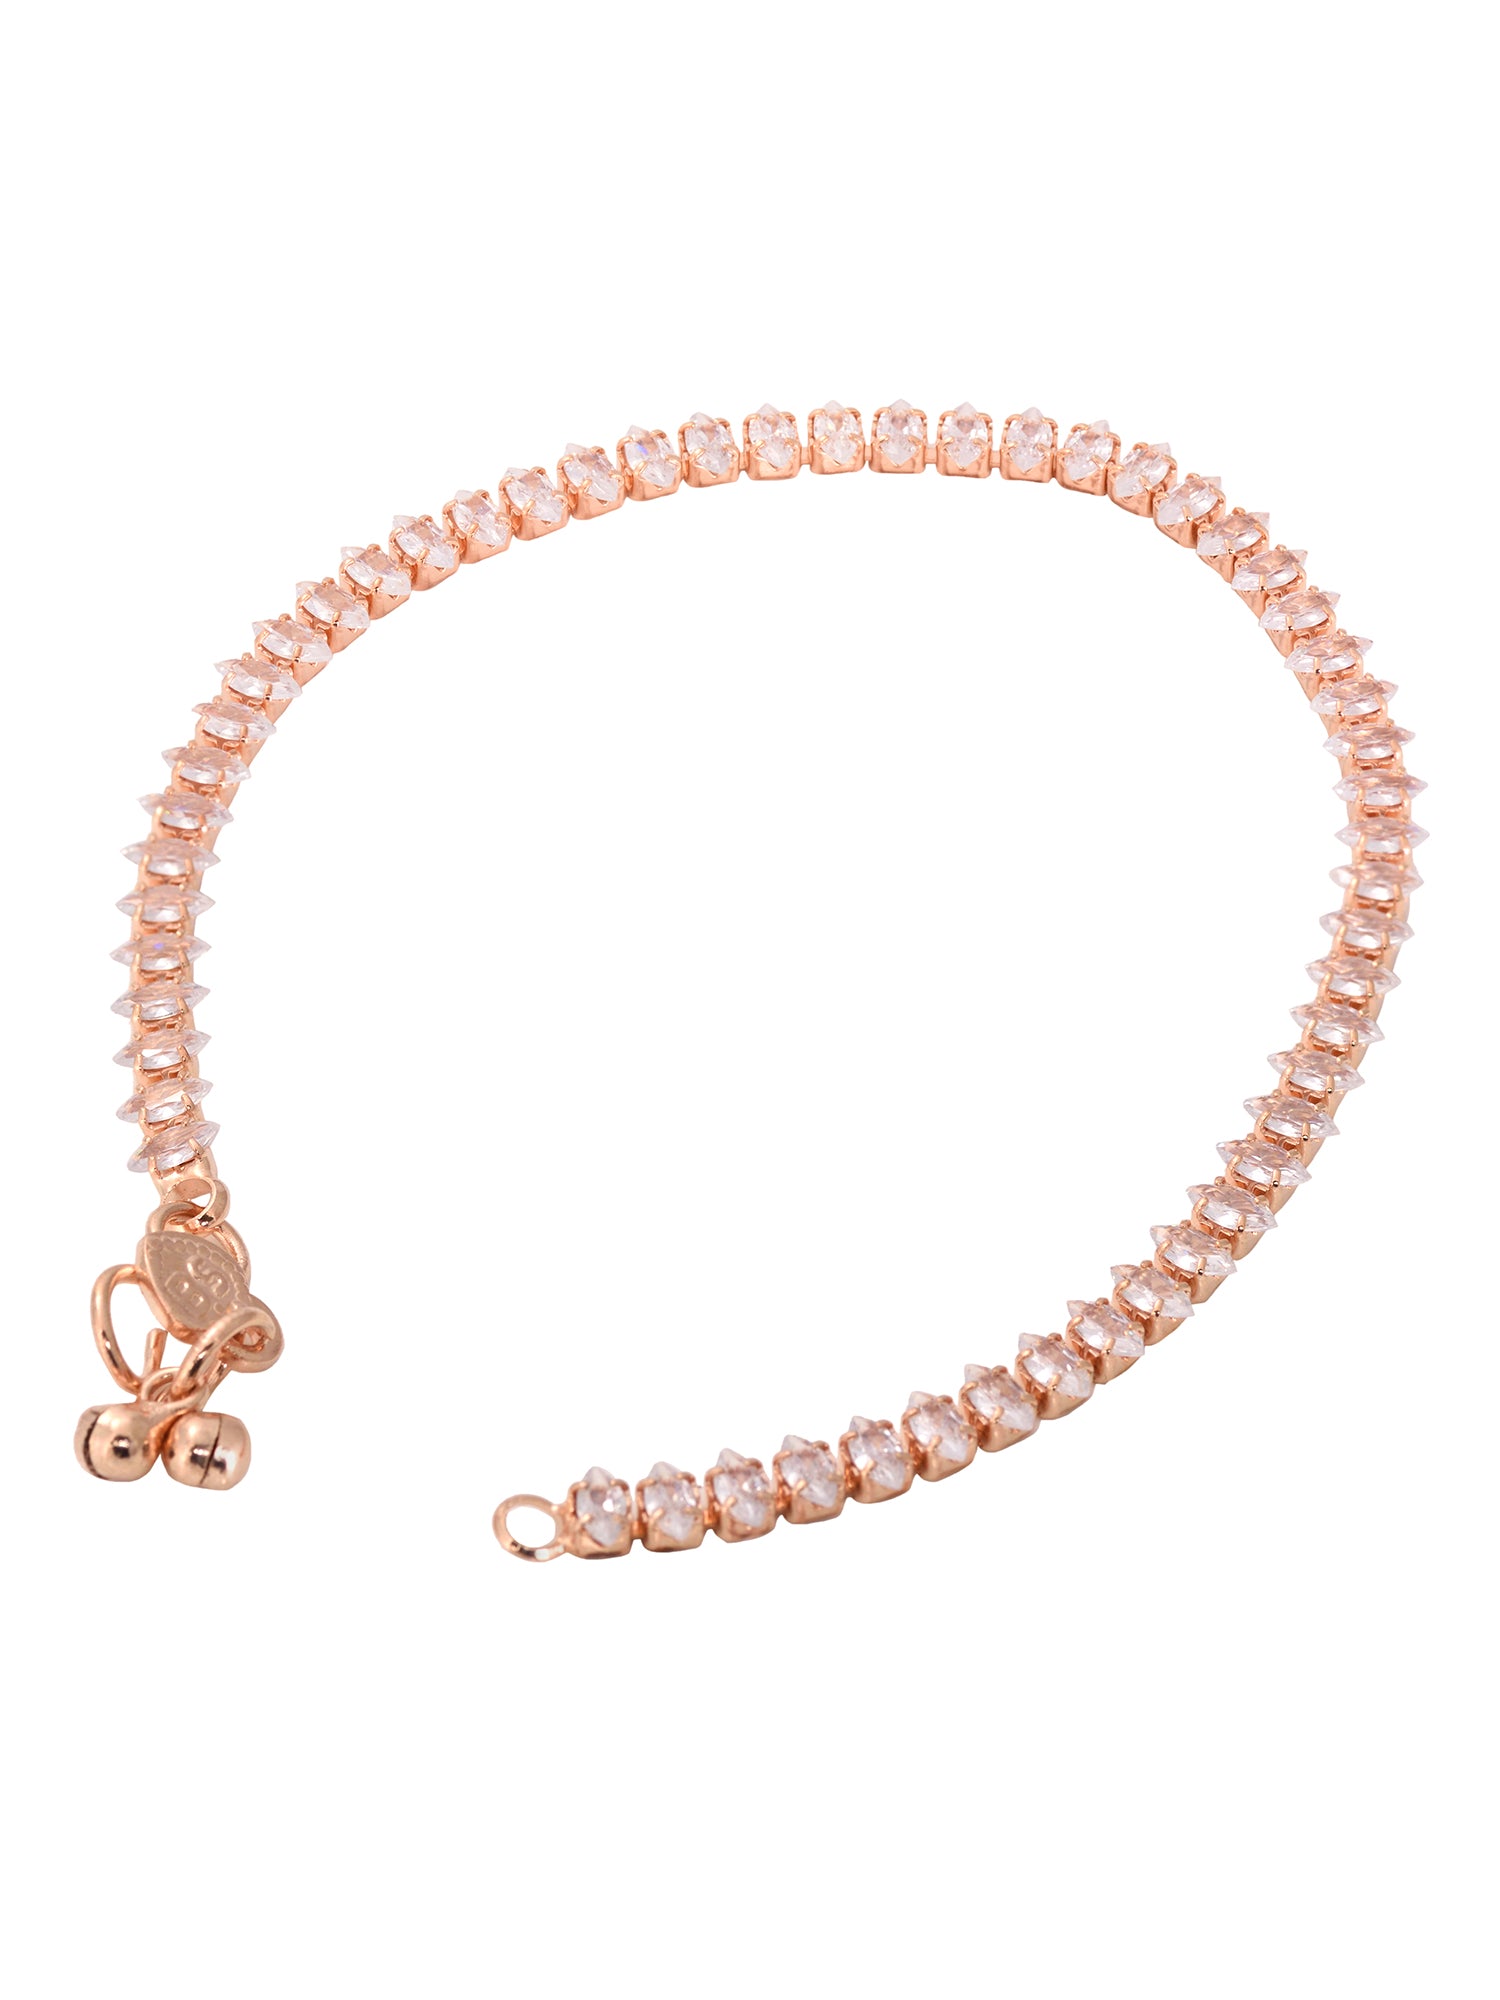 Set Of 2 Rose Gold Plated White AD Studded Payal Anklet, zaveri pearls, sale price rs, sale price, sale gold plated, sale gold, sale, rubans, ring, regular price, priyassi jewellery, kushal's